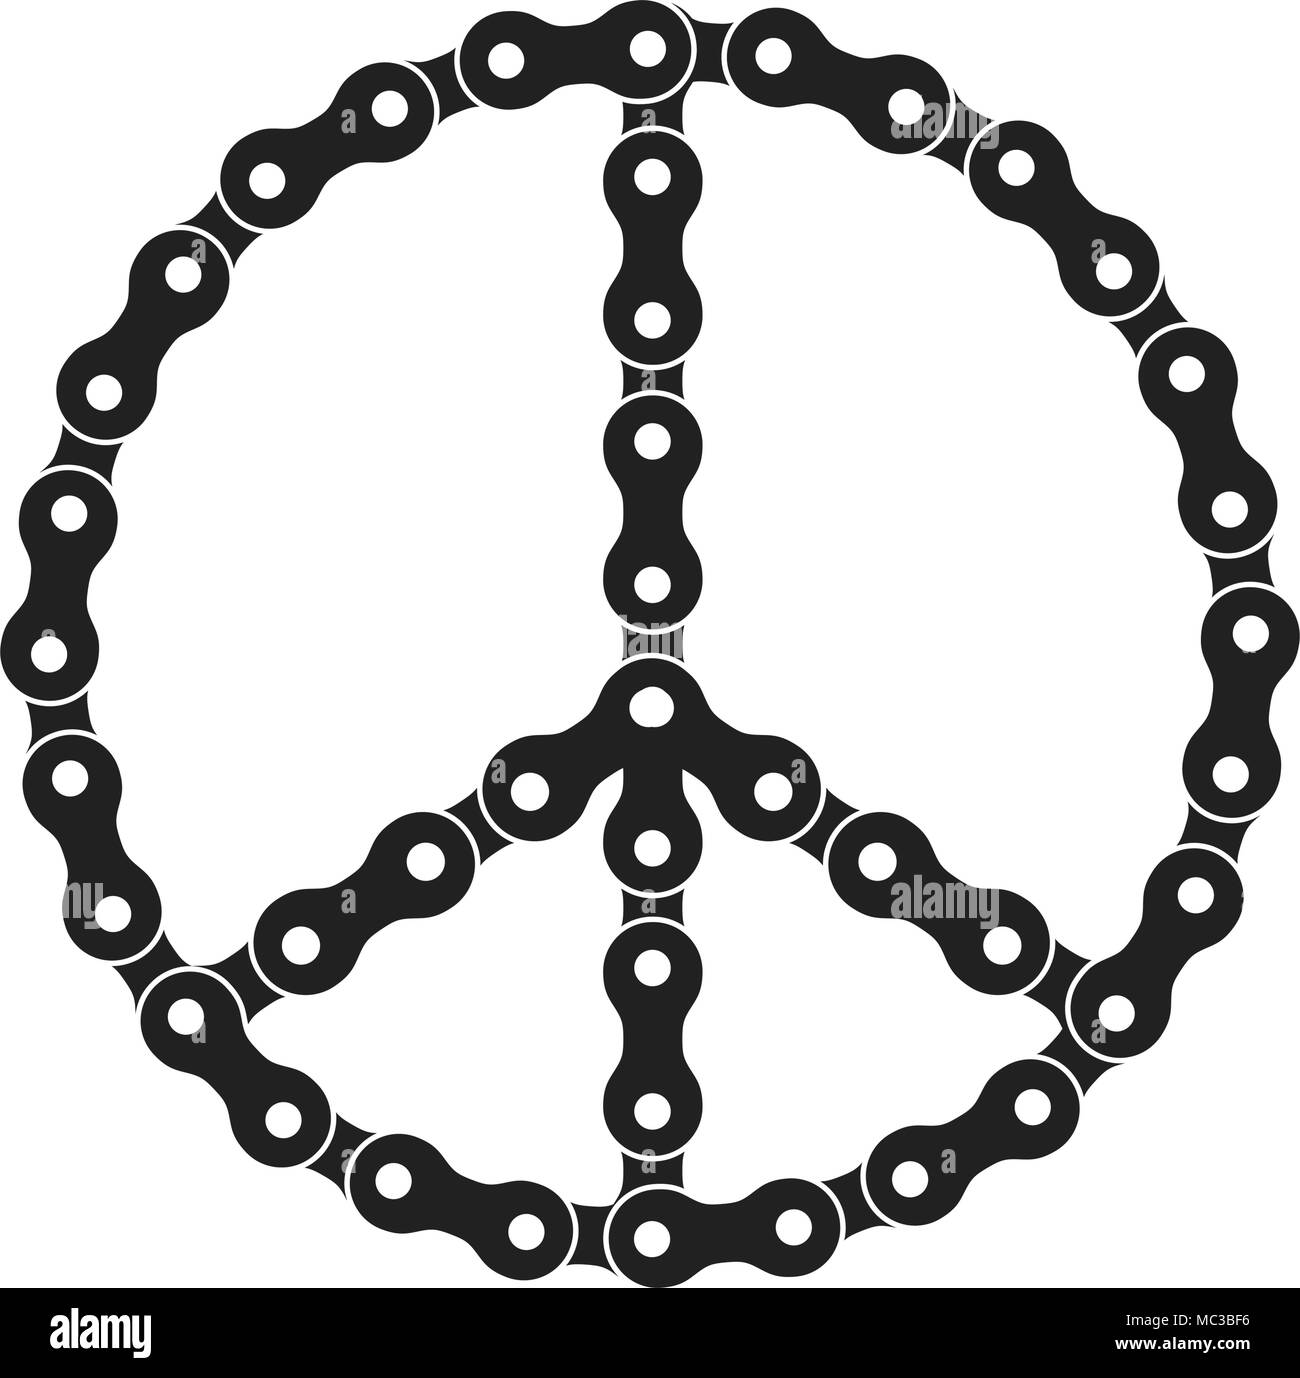 Vector Peace Sign Made of Bike or Bicycle Chain. Vector Hippie Symbol Stock Vector